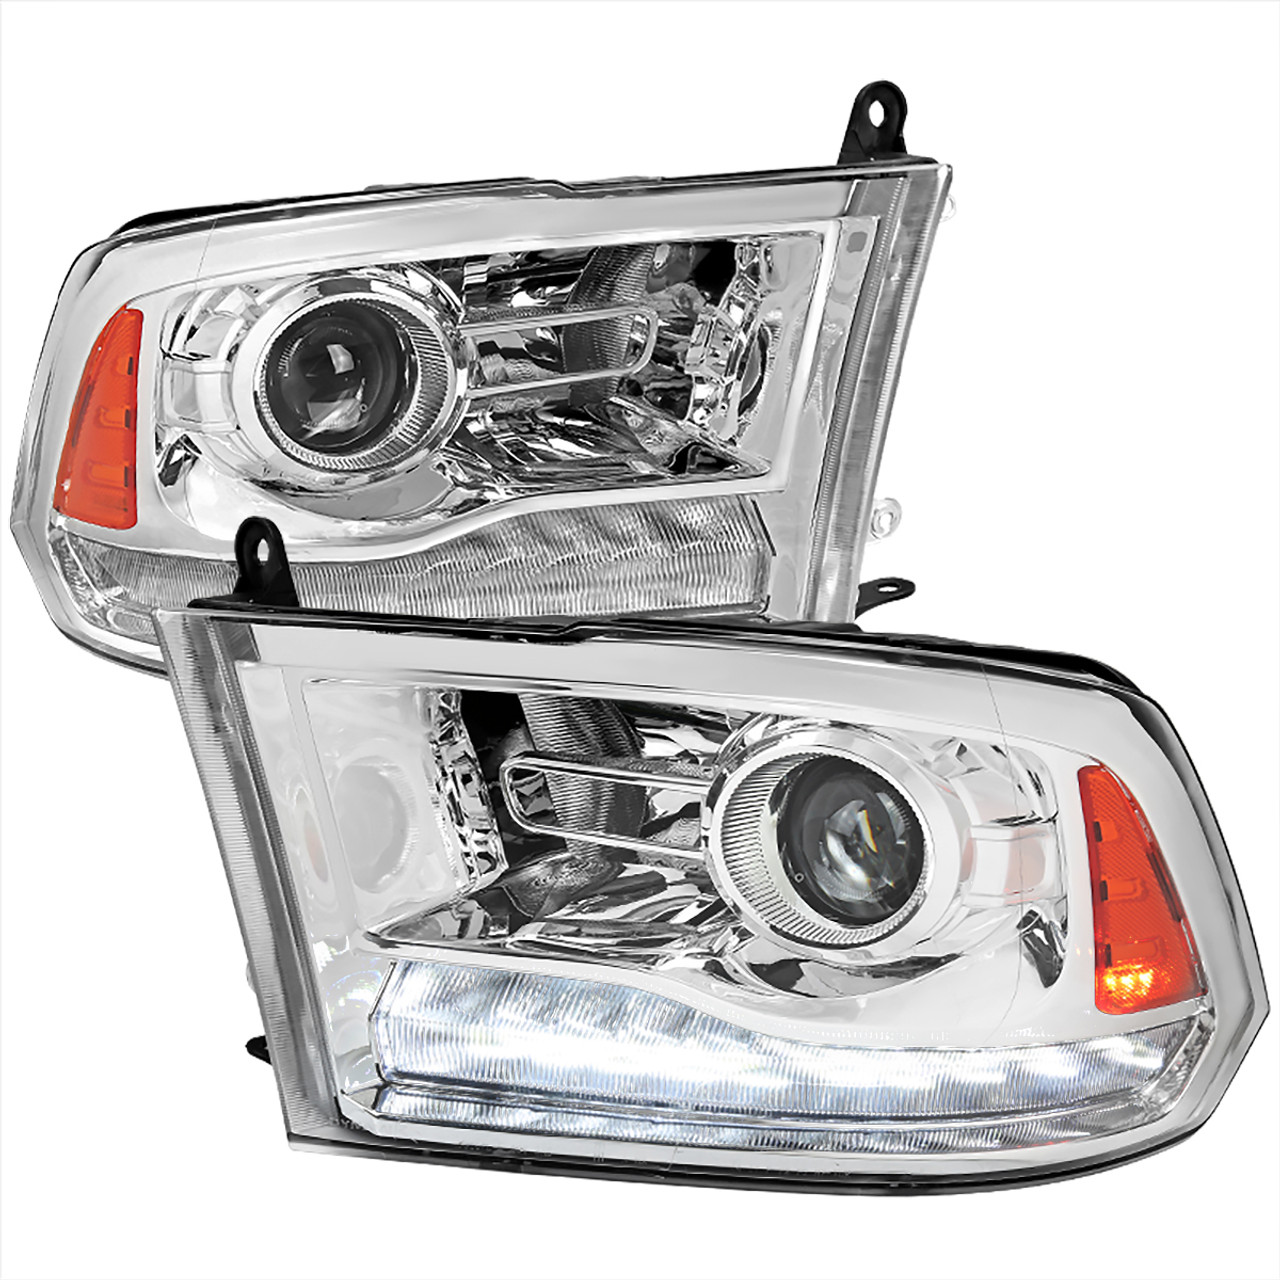 Headlights for 2010 Dodge Ram 3500 for sale